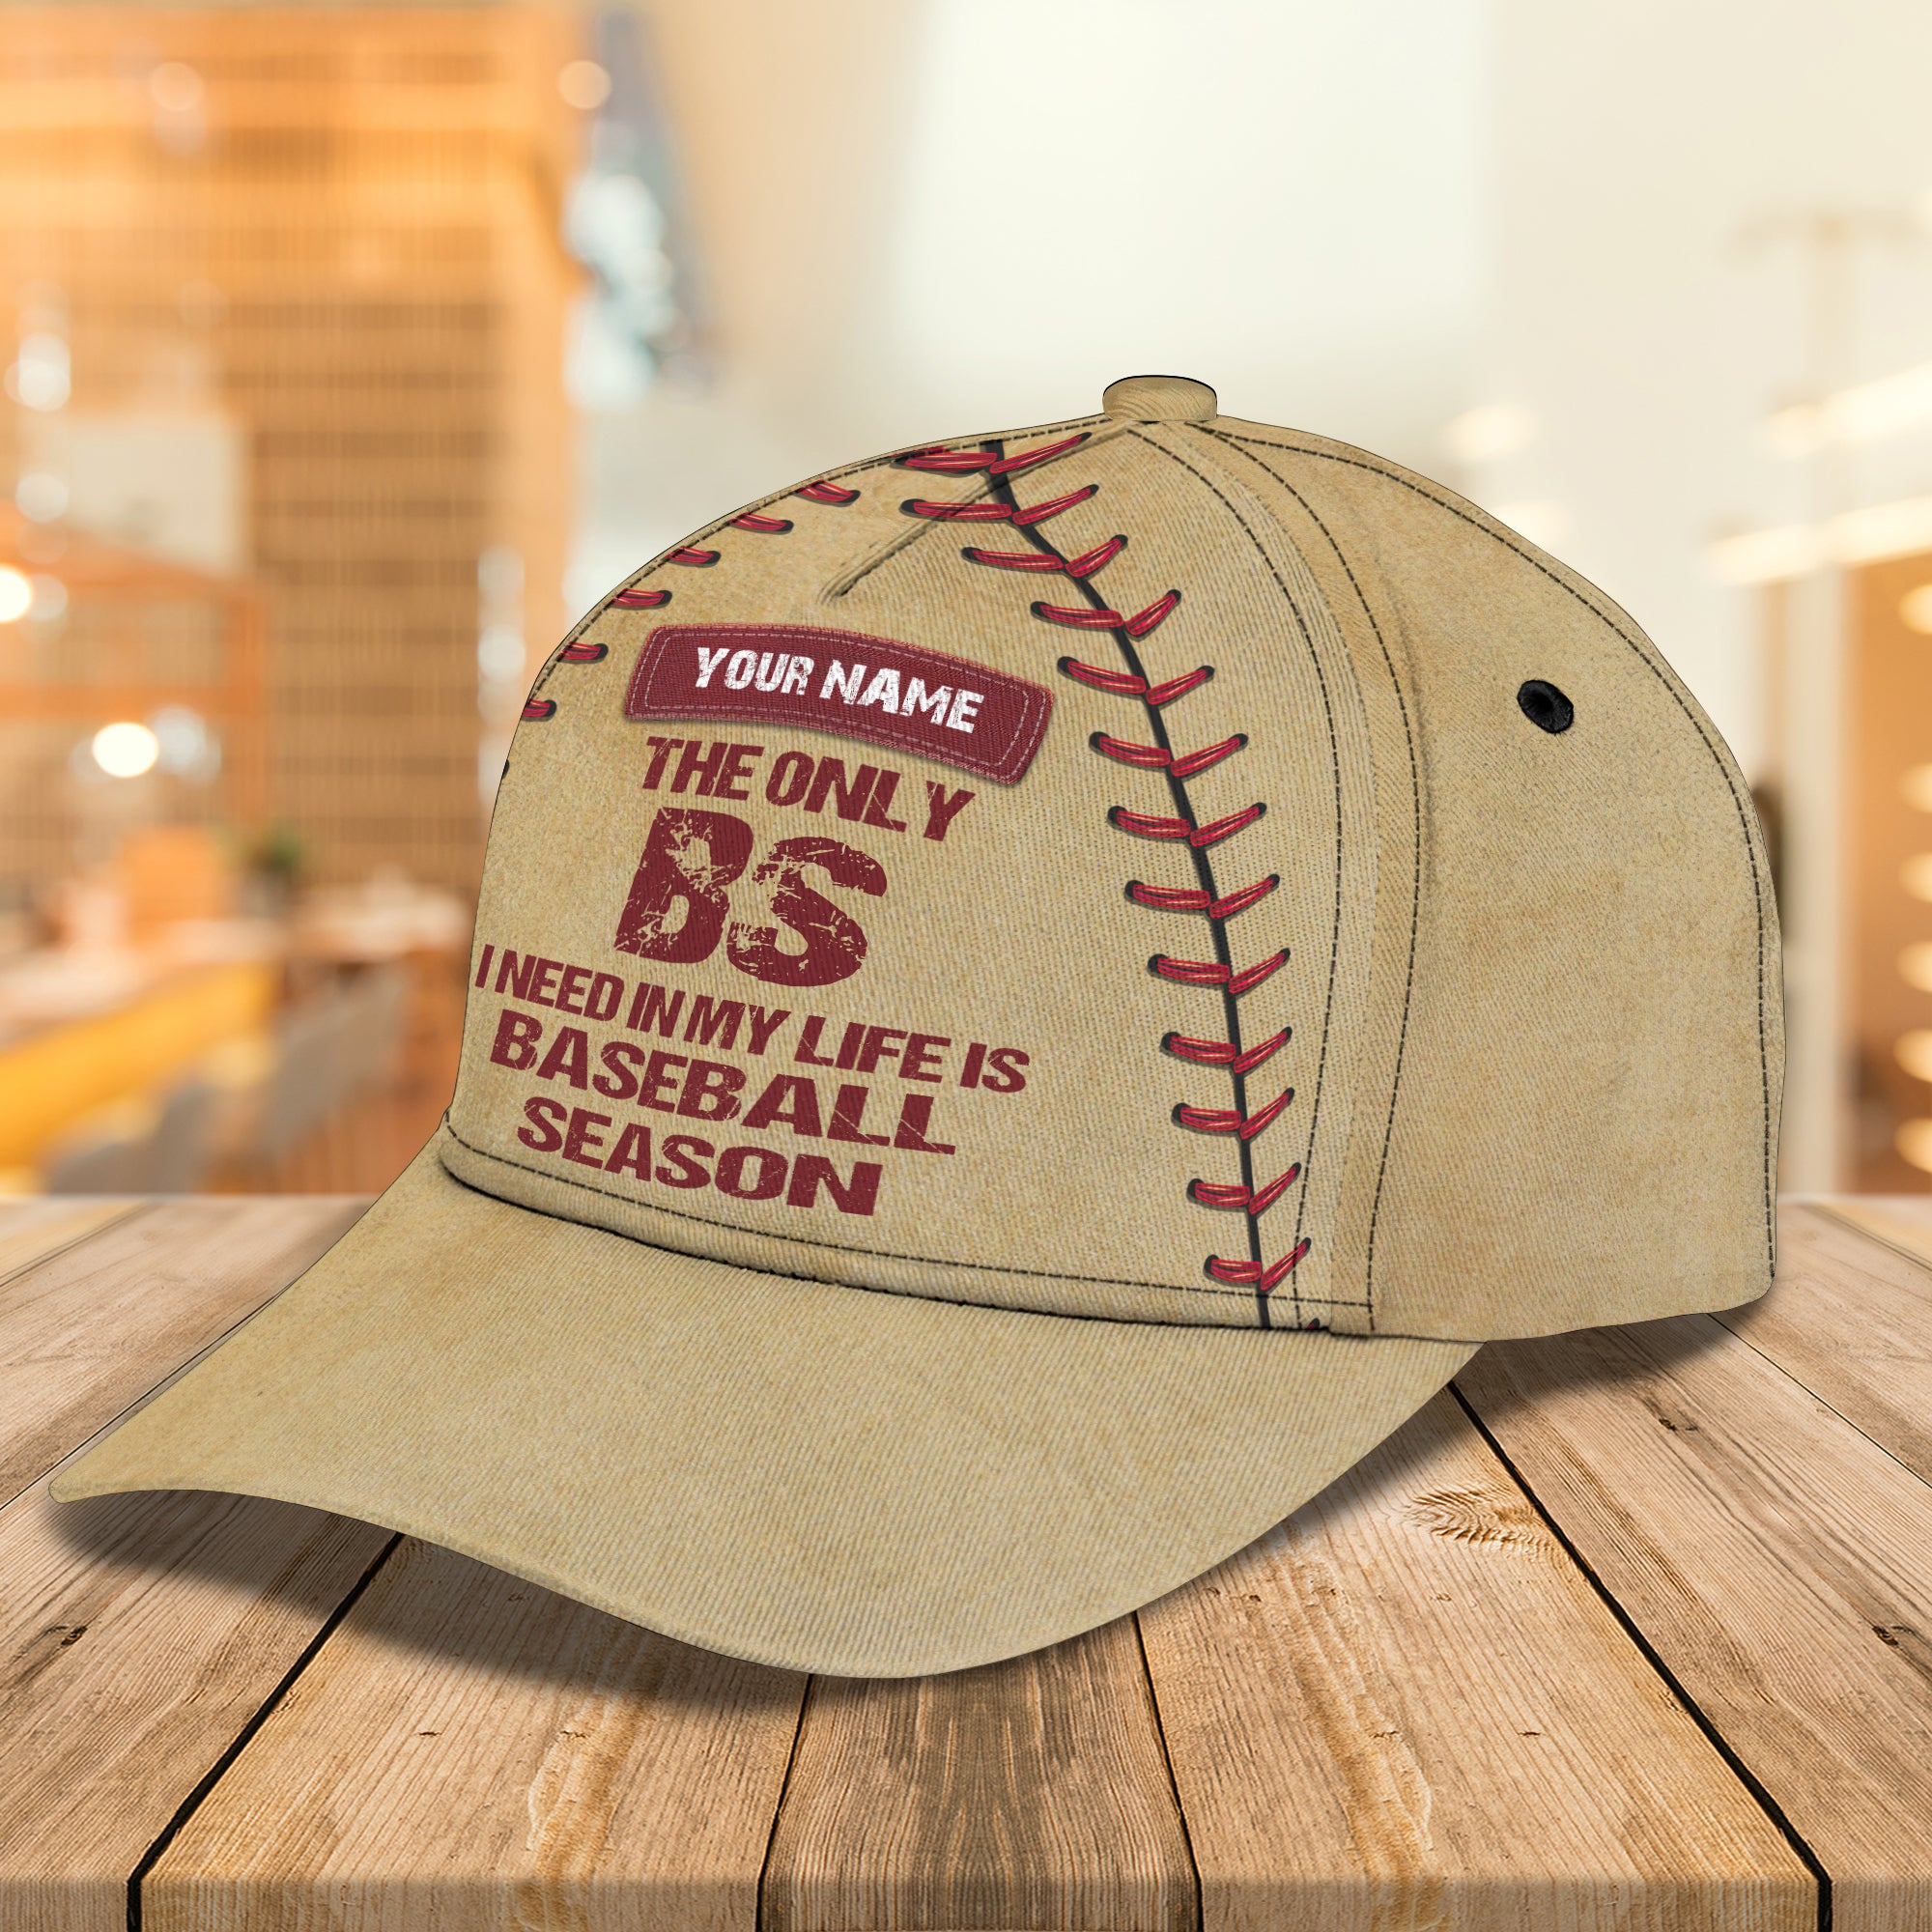 The Only B S I Need Is Baseball Season - Personalized Name Cap 16 - Bhn97